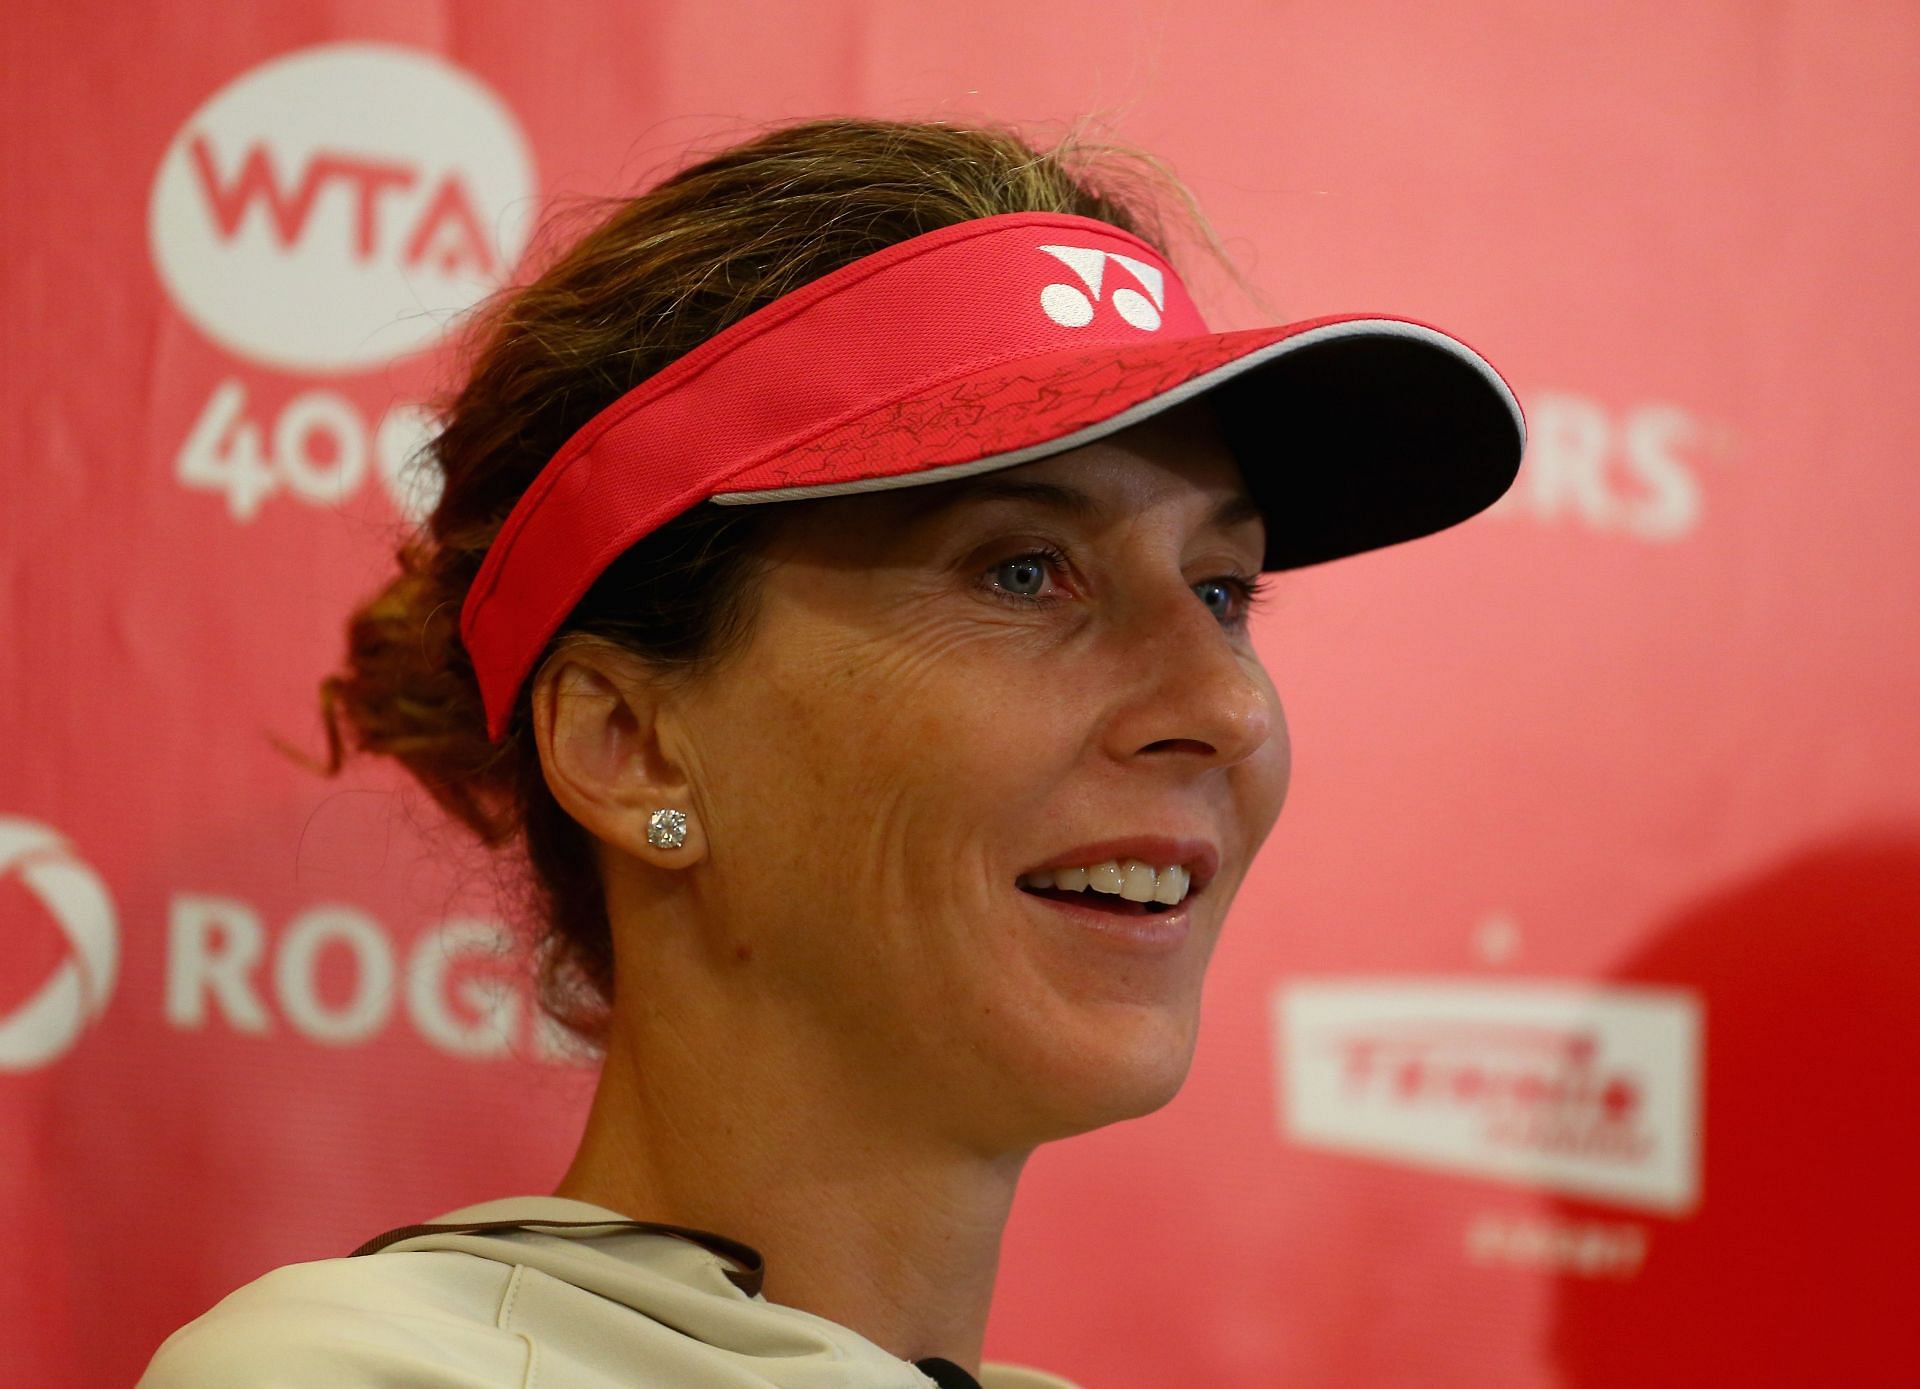 Monica Seles during the Canadian Open in 2013